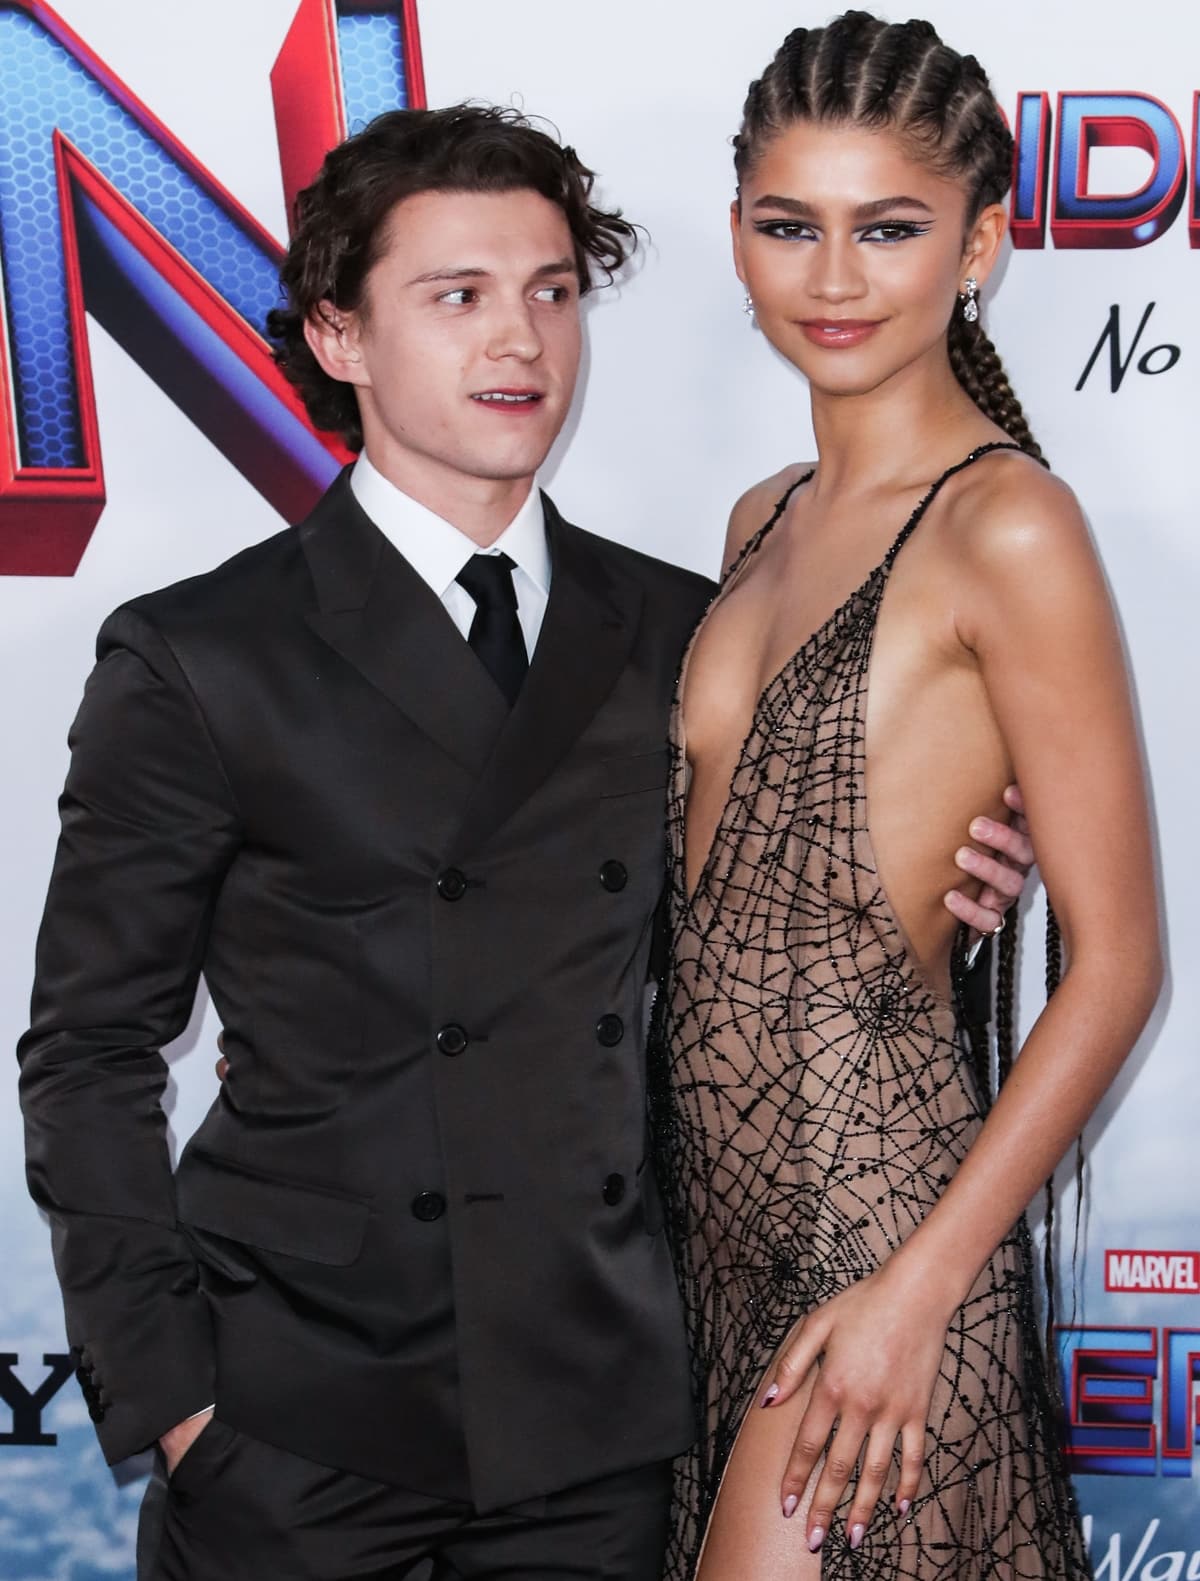 Tom Holland tries to check out Zendaya's sideboob on the red carpet